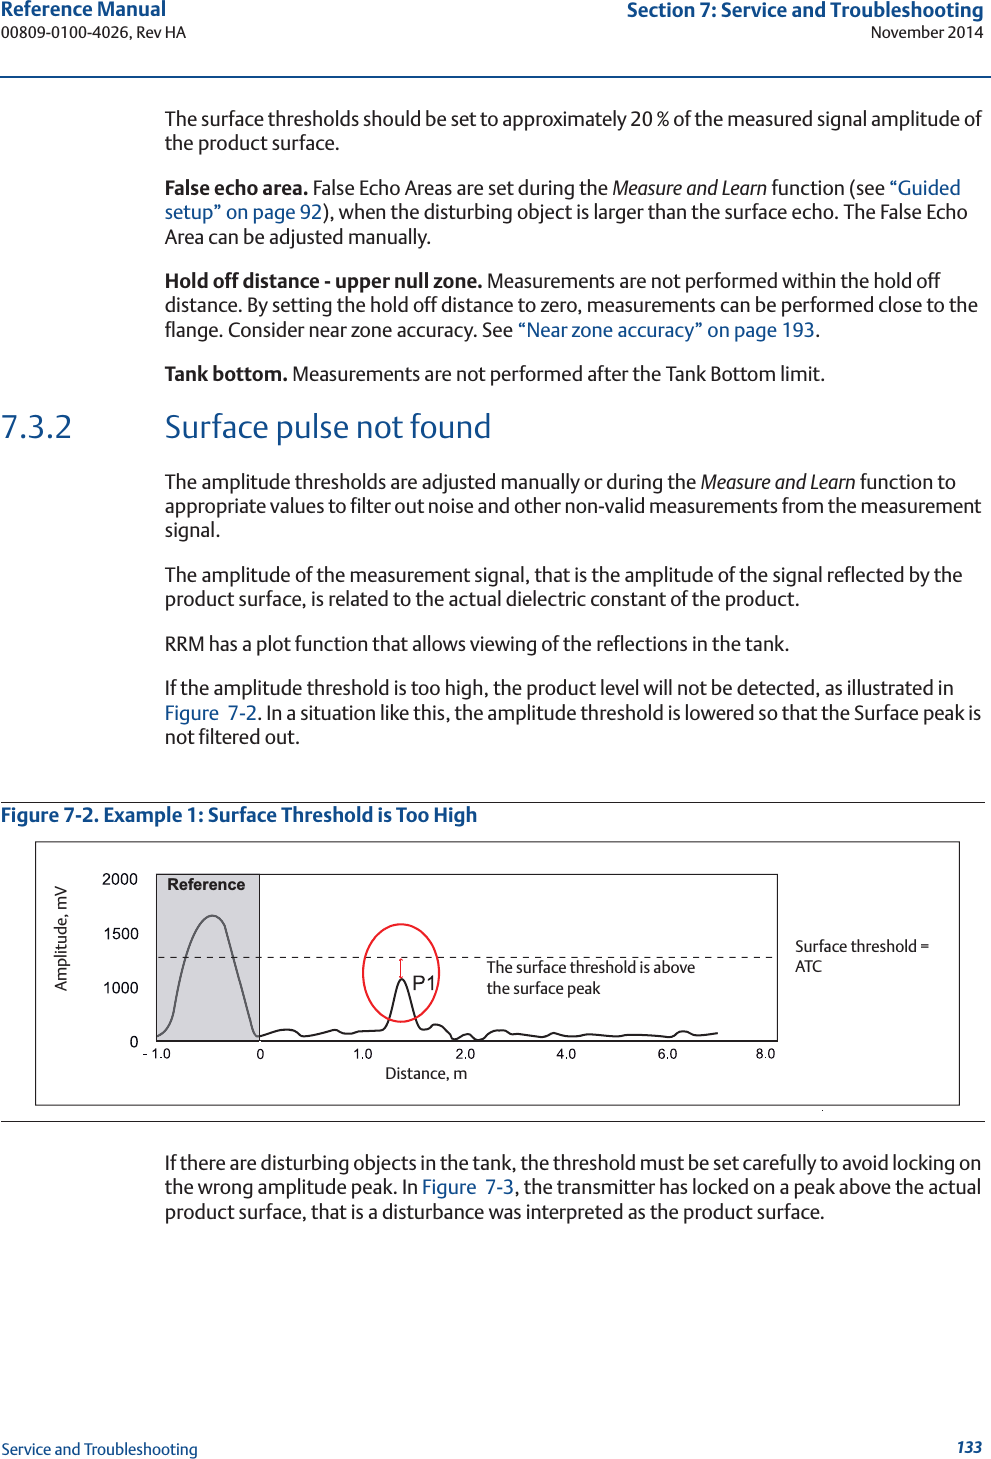 133Reference Manual 00809-0100-4026, Rev HASection 7: Service and TroubleshootingNovember 2014Service and TroubleshootingThe surface thresholds should be set to approximately 20 % of the measured signal amplitude of the product surface.False echo area. False Echo Areas are set during the Measure and Learn function (see “Guided setup” on page 92), when the disturbing object is larger than the surface echo. The False Echo Area can be adjusted manually.Hold off distance - upper null zone. Measurements are not performed within the hold off distance. By setting the hold off distance to zero, measurements can be performed close to the flange. Consider near zone accuracy. See “Near zone accuracy” on page 193.Tank bottom. Measurements are not performed after the Tank Bottom limit.7.3.2 Surface pulse not foundThe amplitude thresholds are adjusted manually or during the Measure and Learn function to appropriate values to filter out noise and other non-valid measurements from the measurement signal.The amplitude of the measurement signal, that is the amplitude of the signal reflected by the product surface, is related to the actual dielectric constant of the product.RRM has a plot function that allows viewing of the reflections in the tank.If the amplitude threshold is too high, the product level will not be detected, as illustrated in Figure 7-2. In a situation like this, the amplitude threshold is lowered so that the Surface peak is not filtered out.Figure 7-2. Example 1: Surface Threshold is Too HighIf there are disturbing objects in the tank, the threshold must be set carefully to avoid locking on the wrong amplitude peak. In Figure 7-3, the transmitter has locked on a peak above the actual product surface, that is a disturbance was interpreted as the product surface. Amplitude, mVThe surface threshold is above the surface peakSurface threshold =ATCDistance, mReference